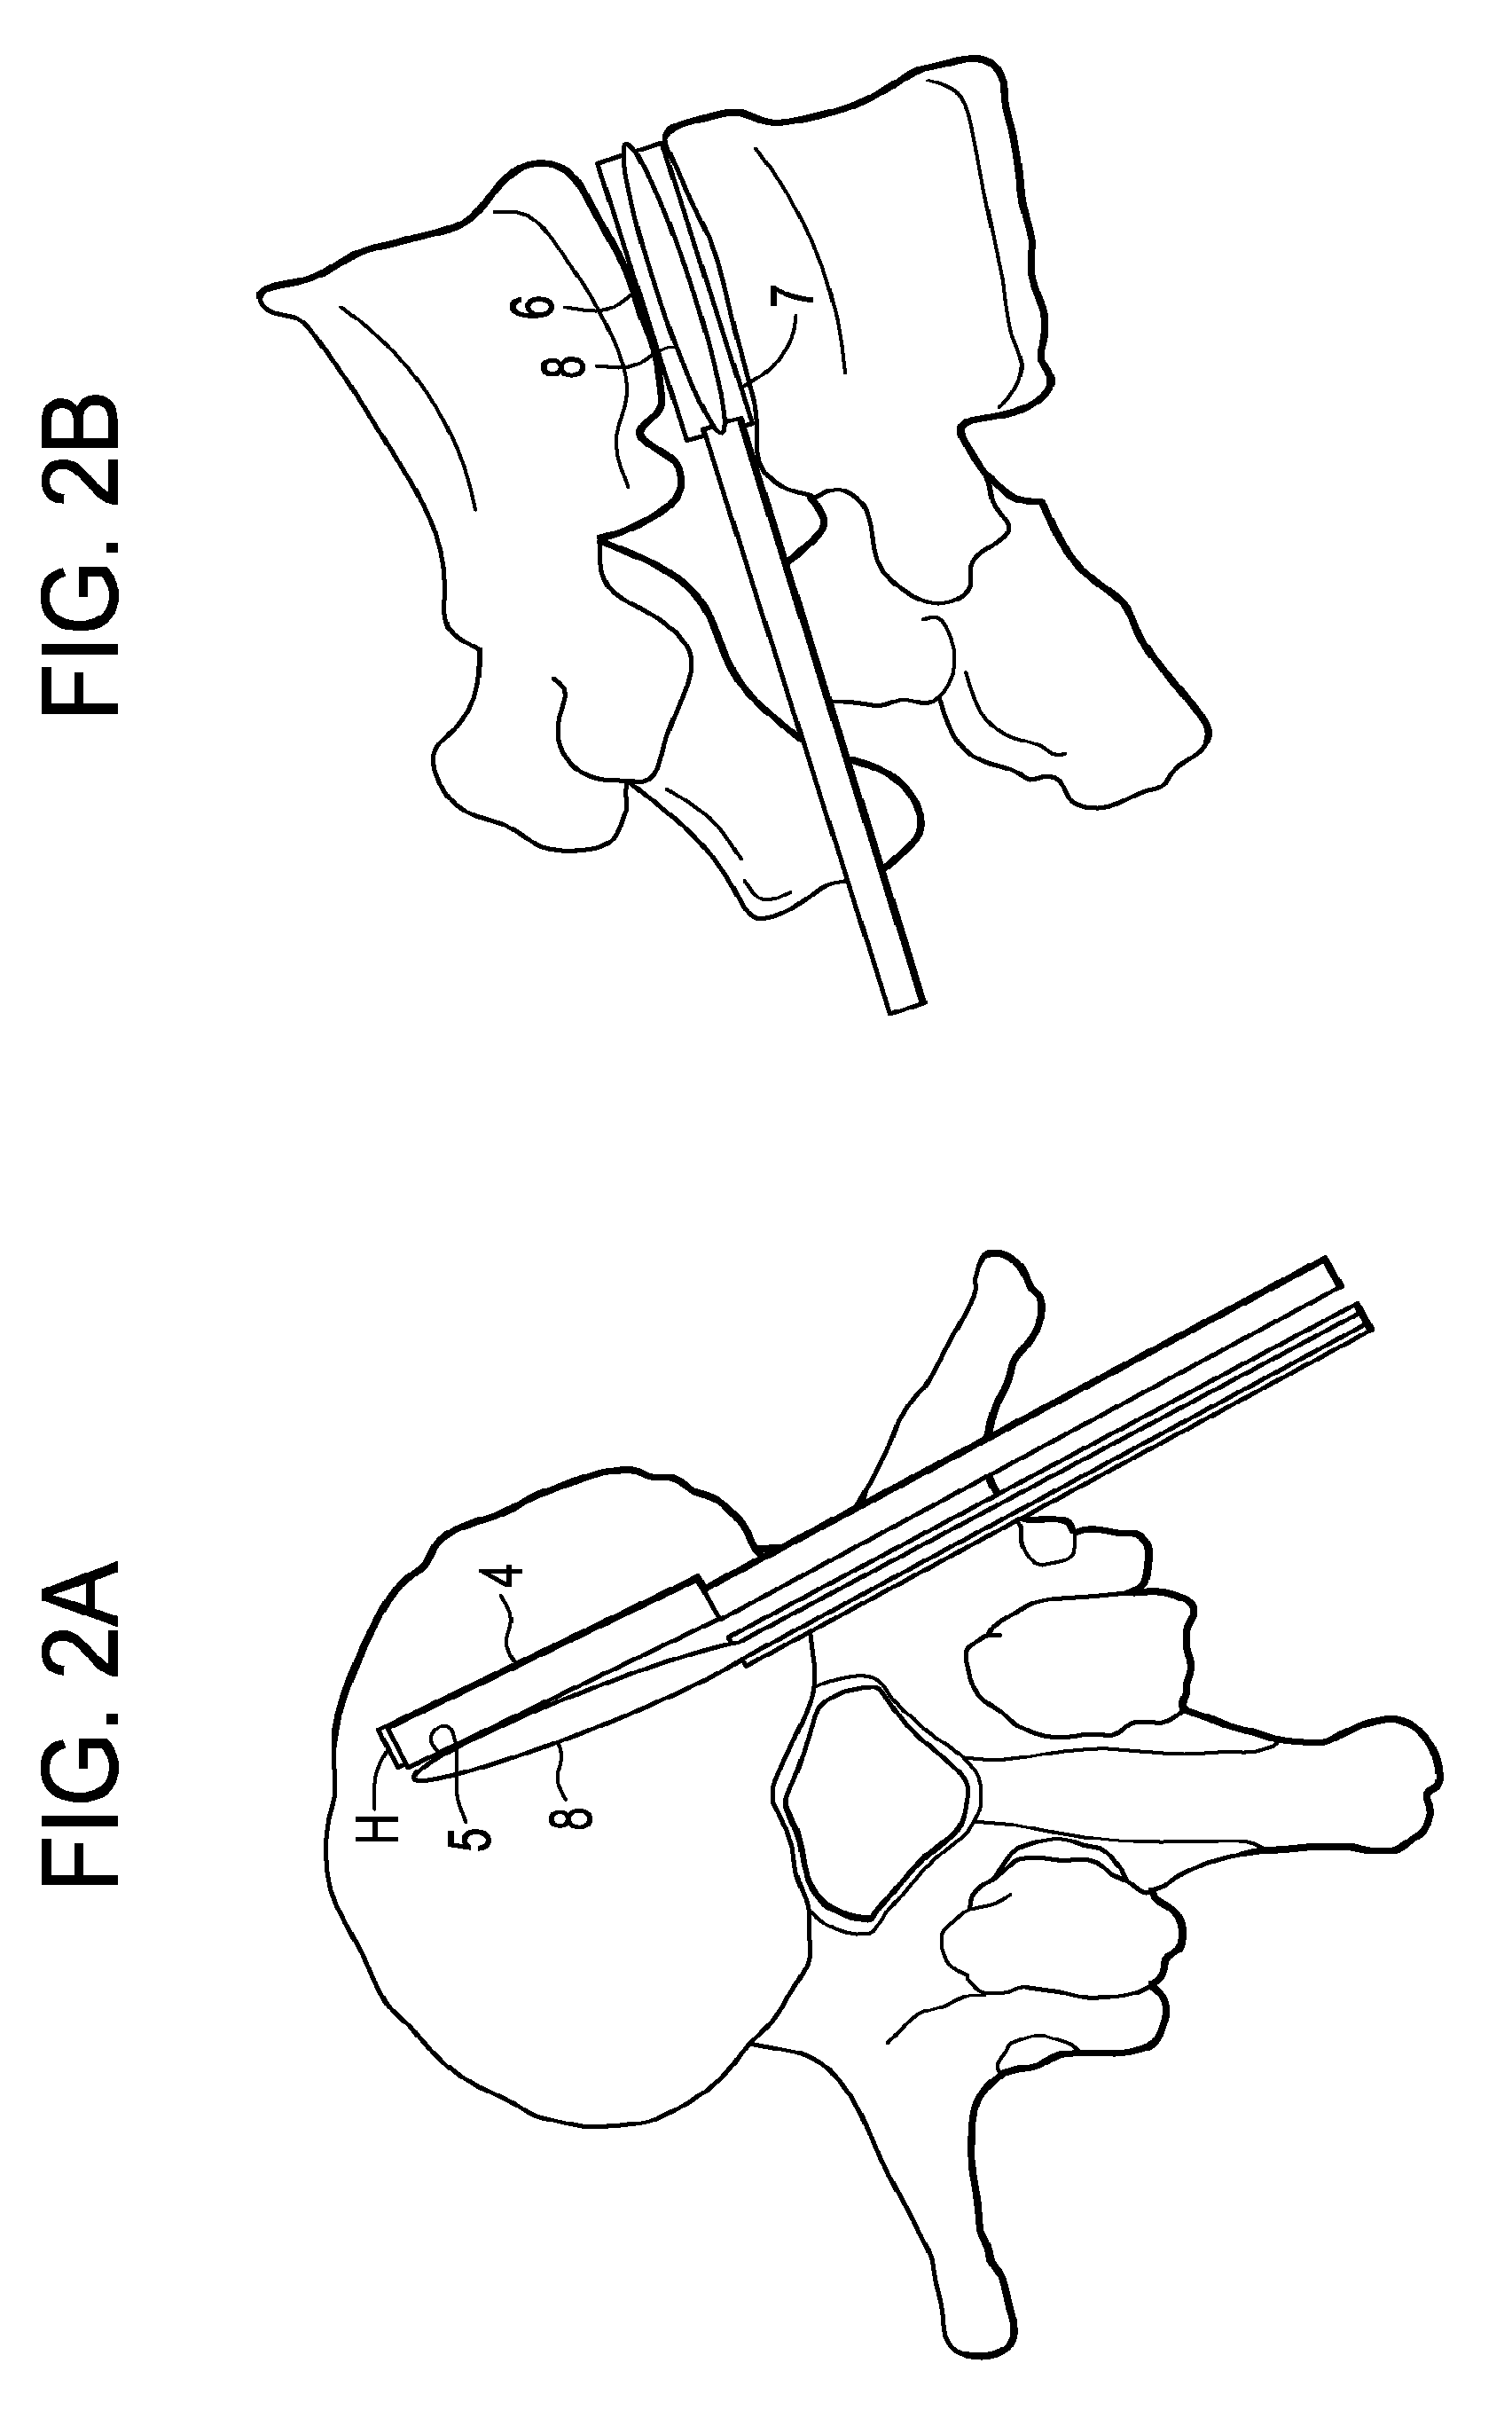 Balloon With Shape Control For Spinal Procedures